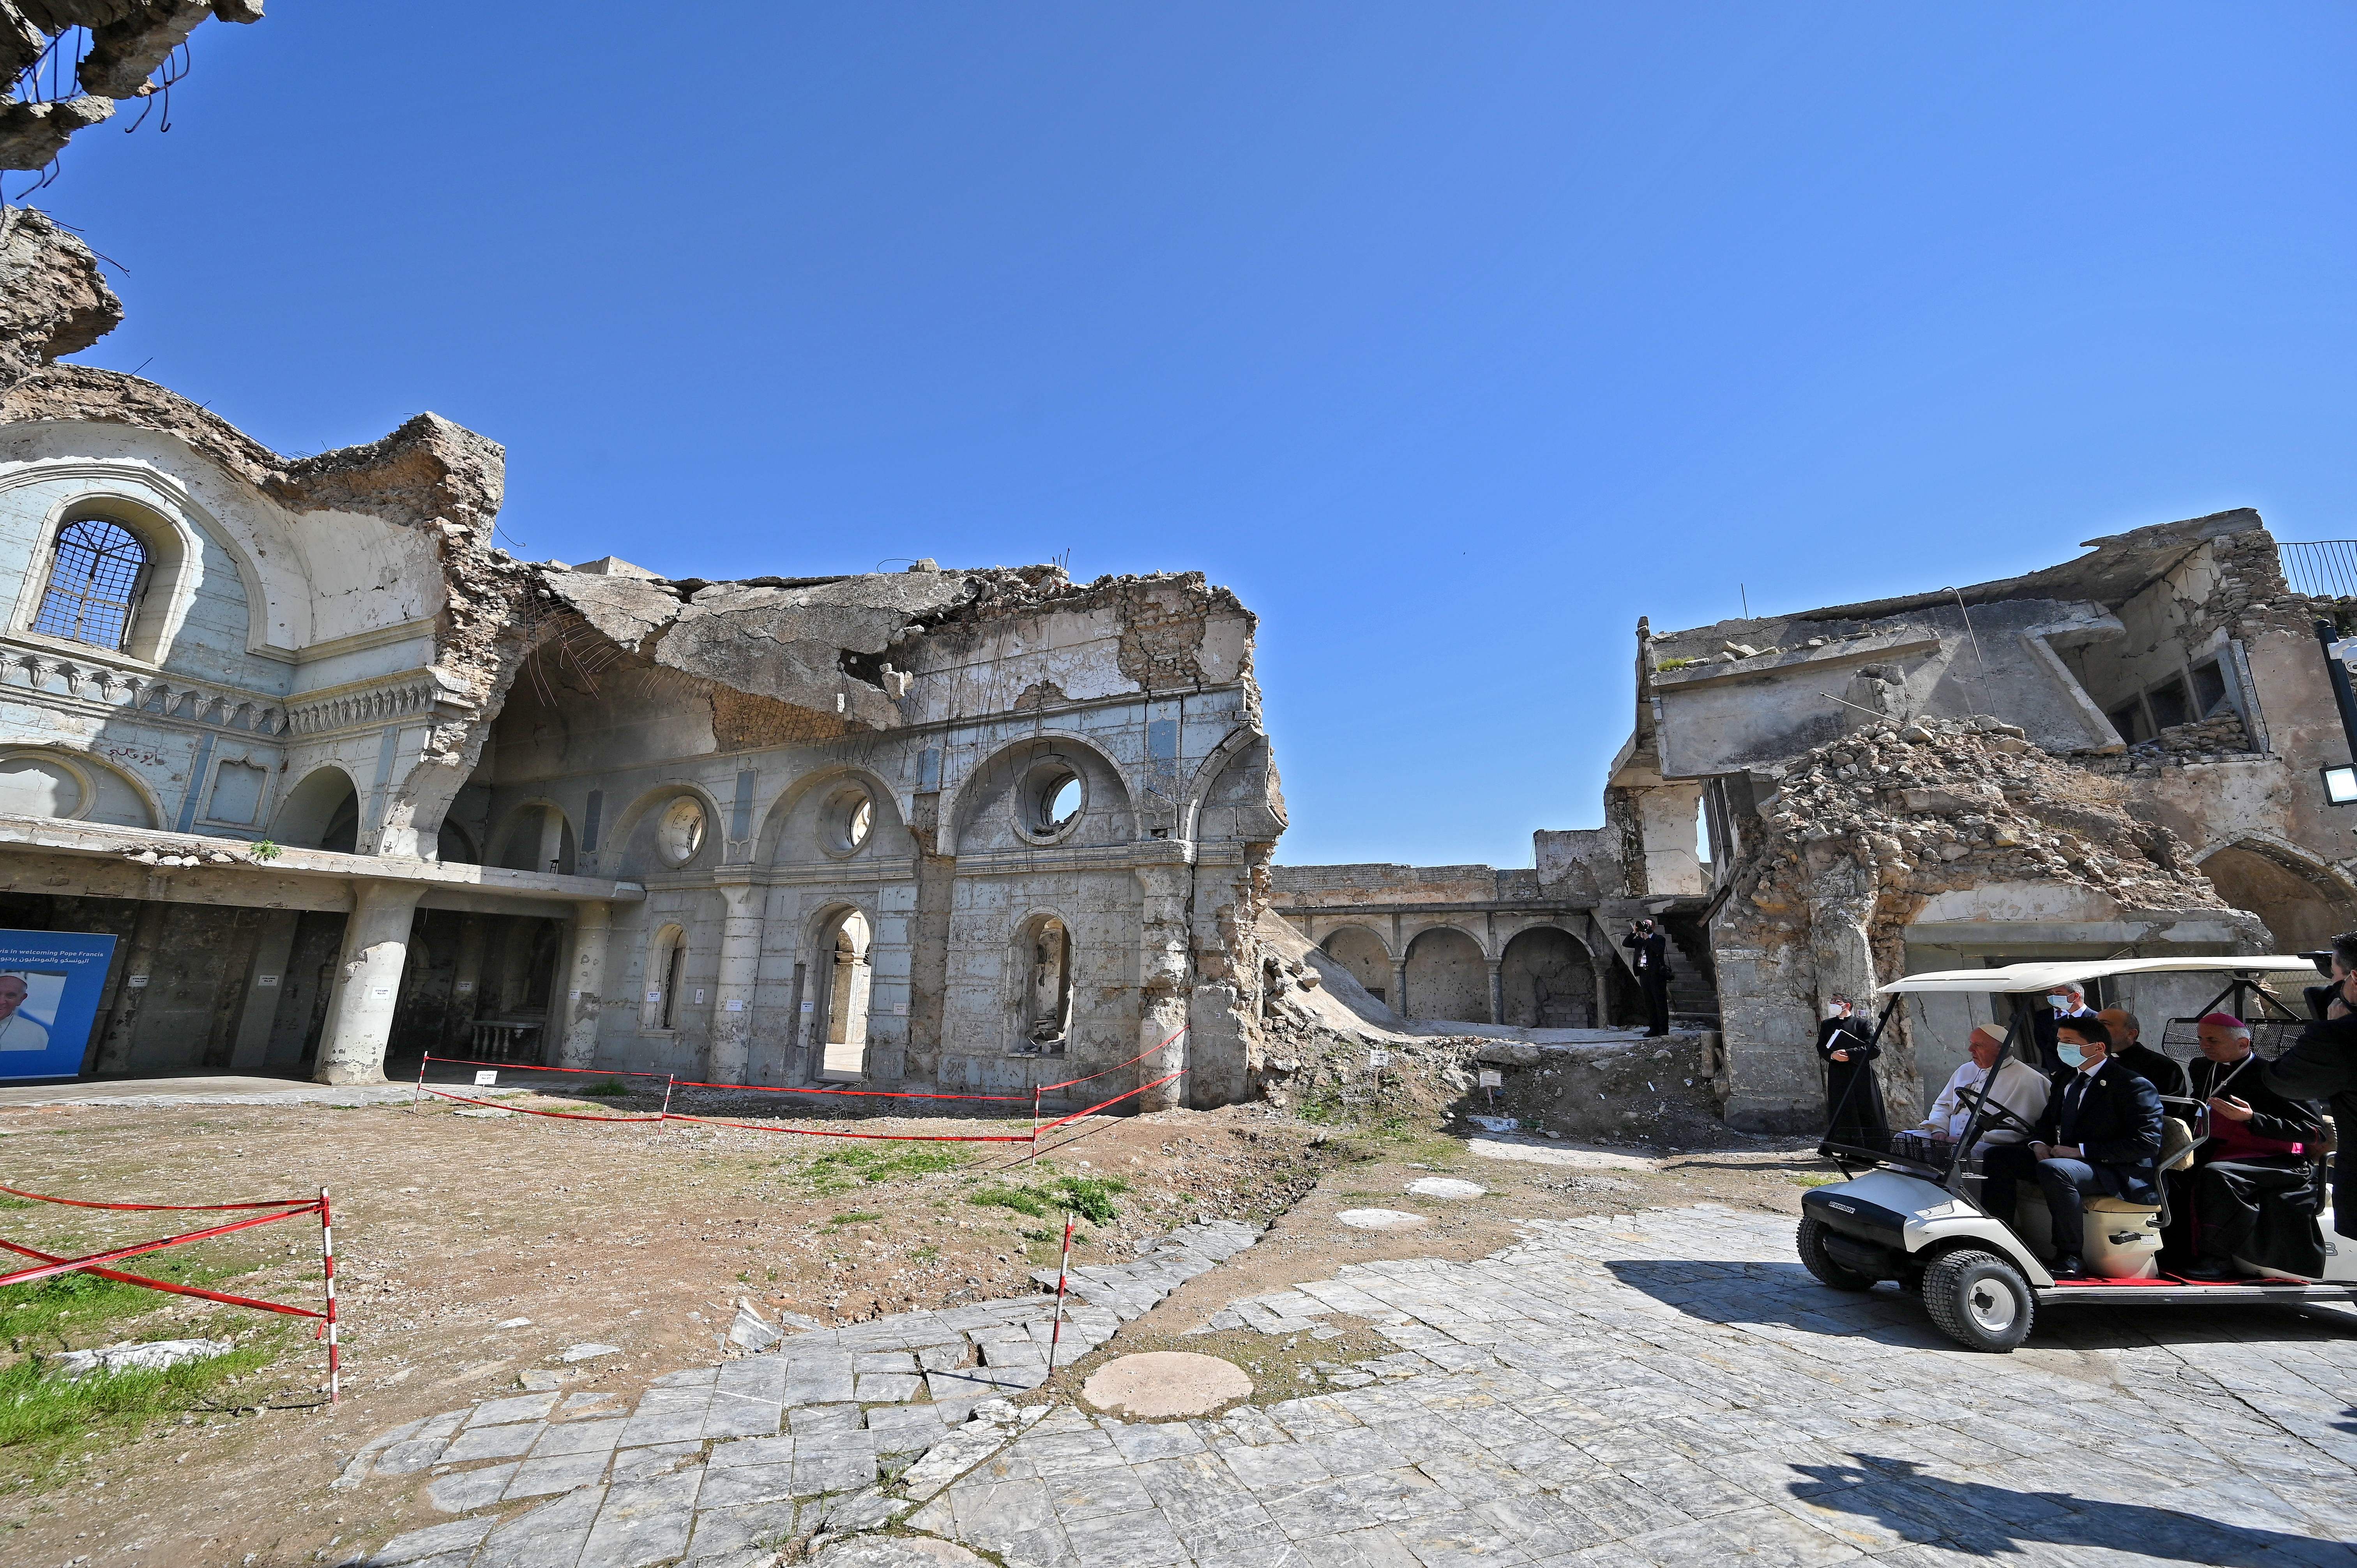 Pope Francis rides in a golf cart at the ruins of the Syriac Catholic Church of the Immaculate Conception (al-Tahira-l-Kubra), in the old city of Iraq's northern Mosul on March 7